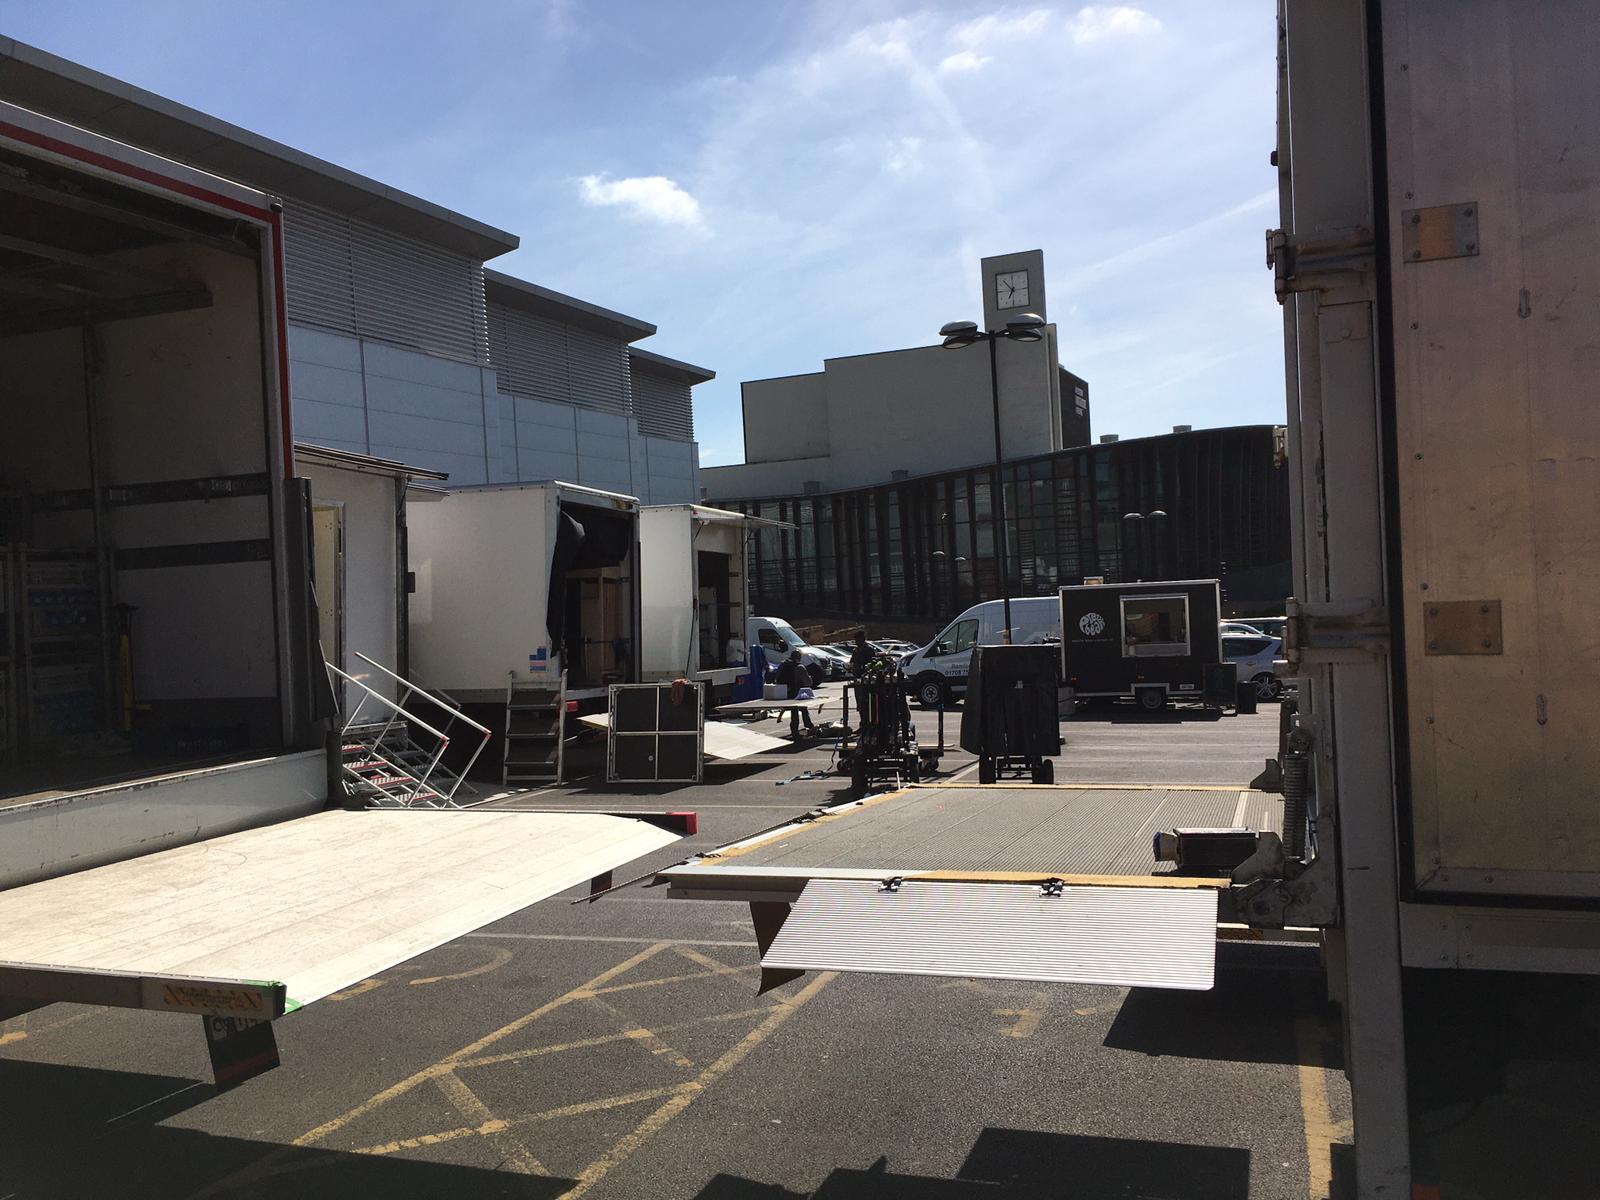 The film crew was spotted in Aylesbury on April 26